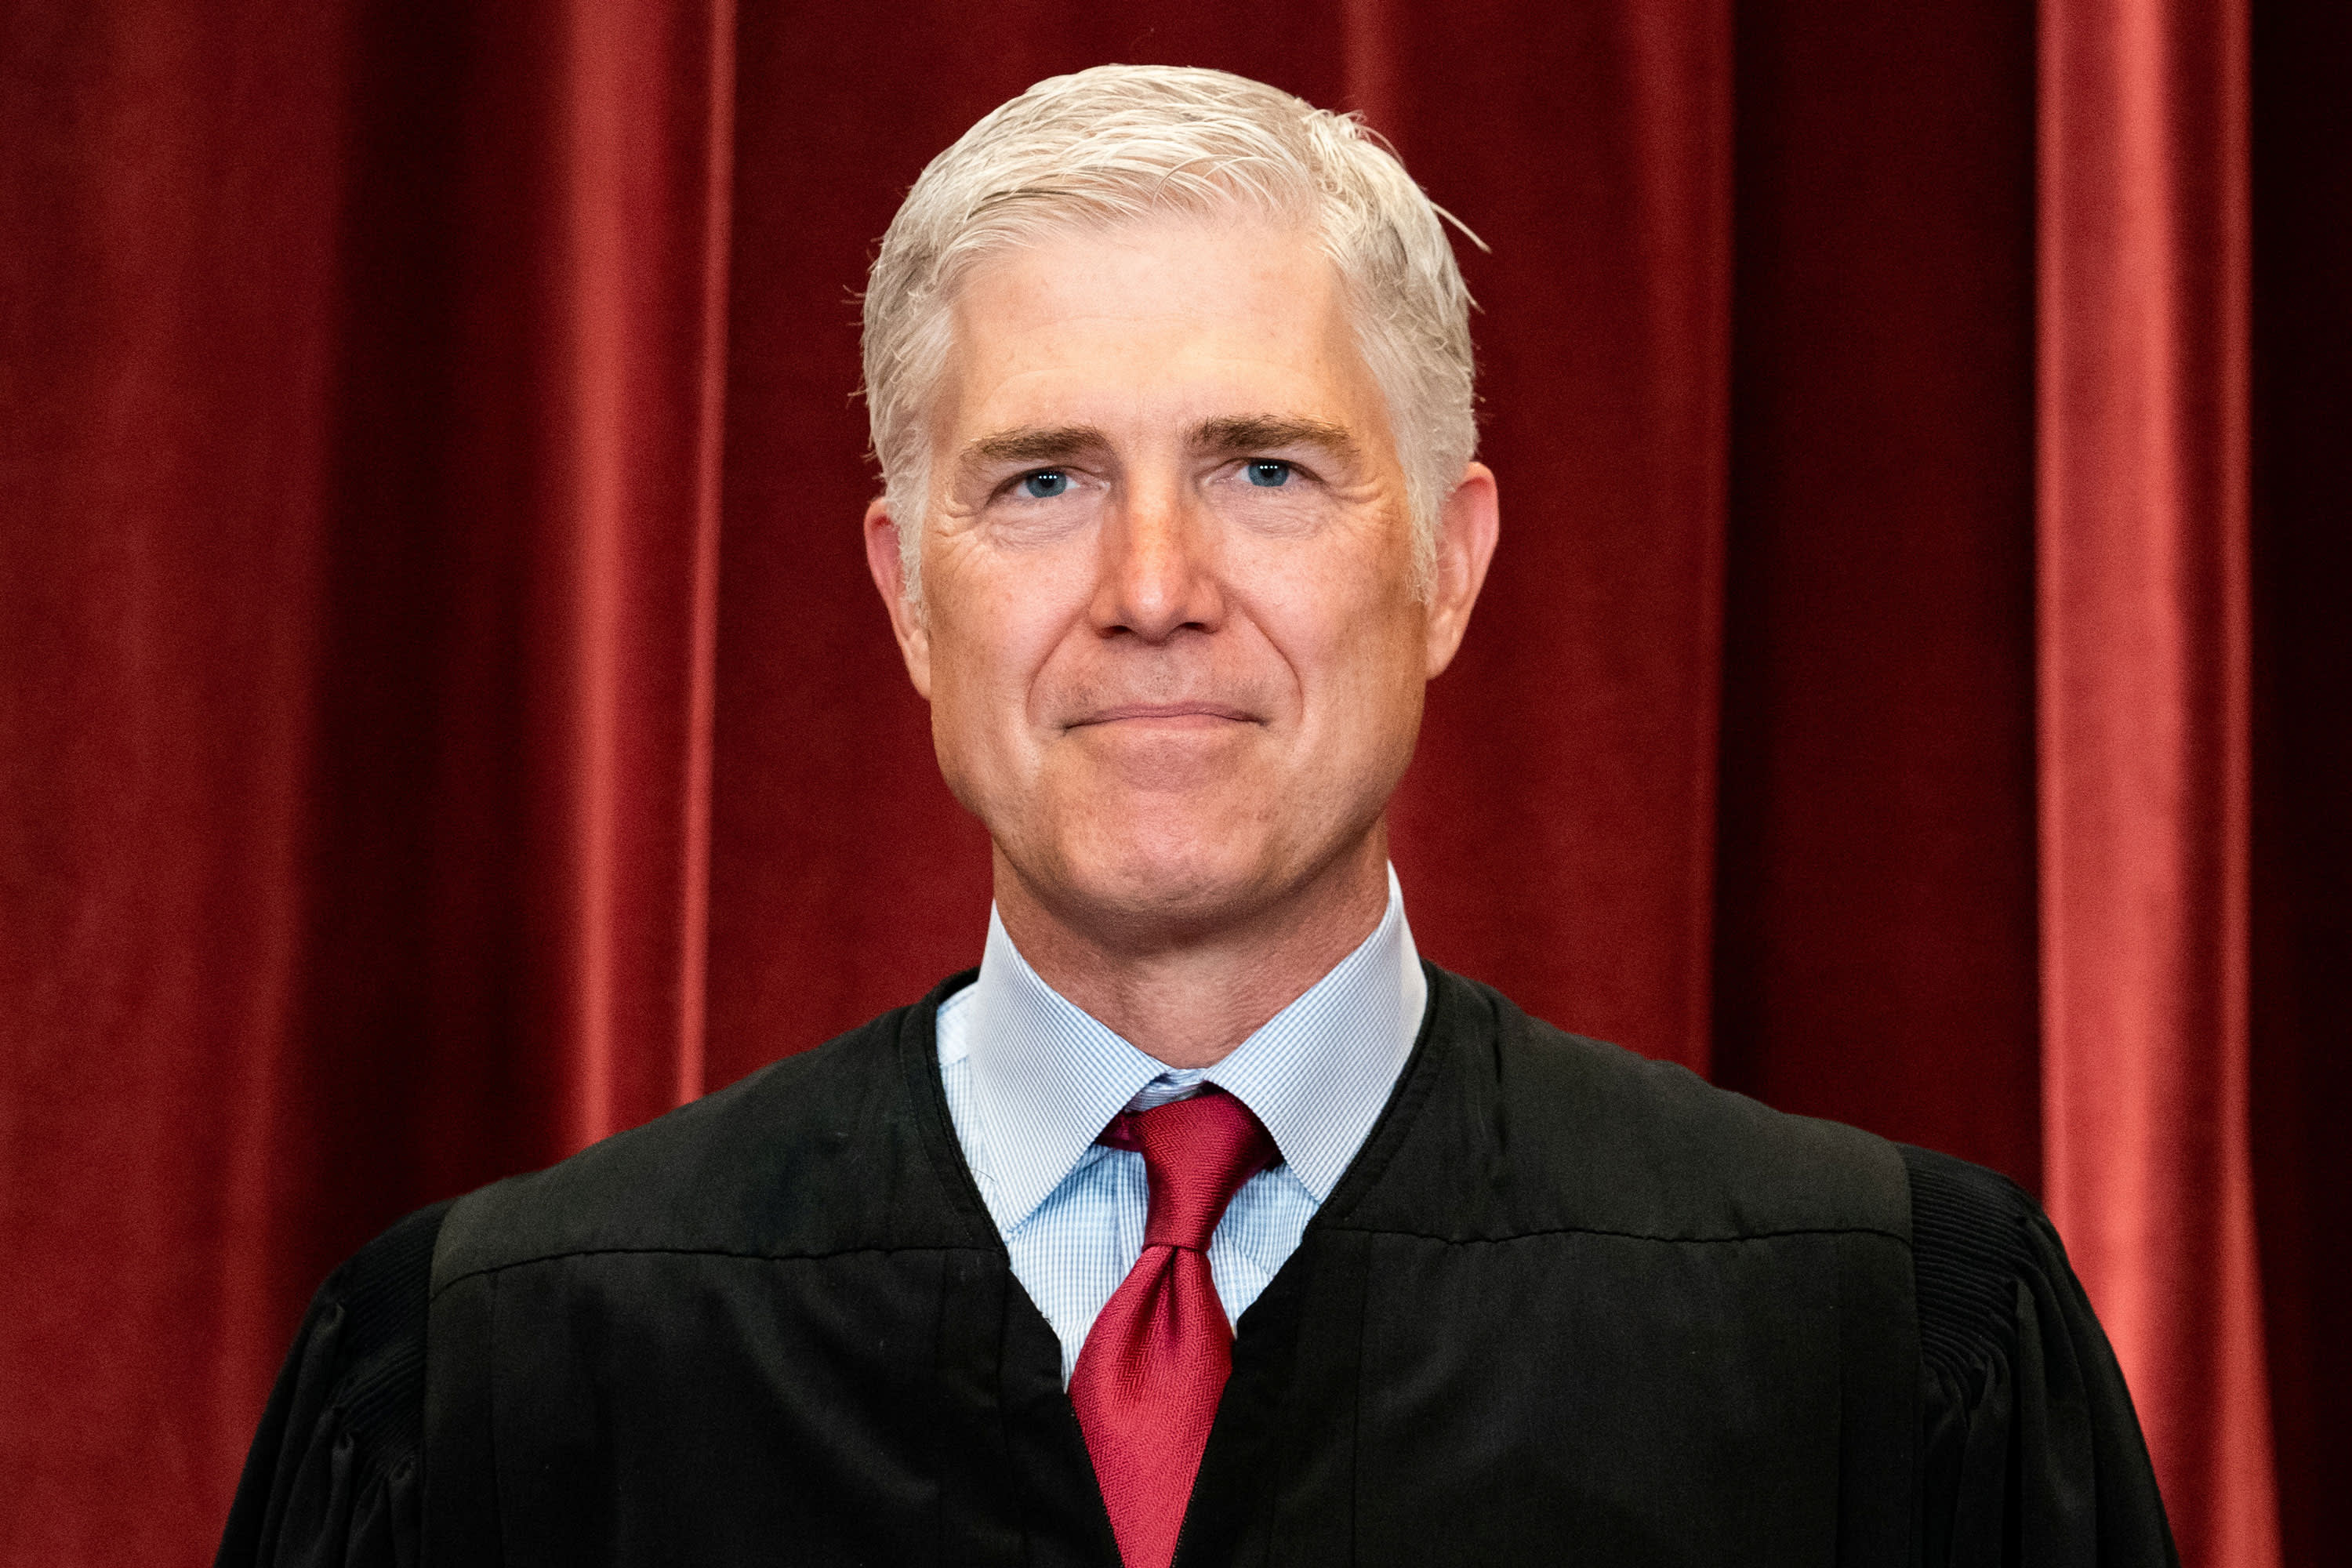 Business News: Supreme Court Justice Neil Gorsuch again doesn’t wear mask on bench, Sotomayor and Breyer log in remotely for hearing